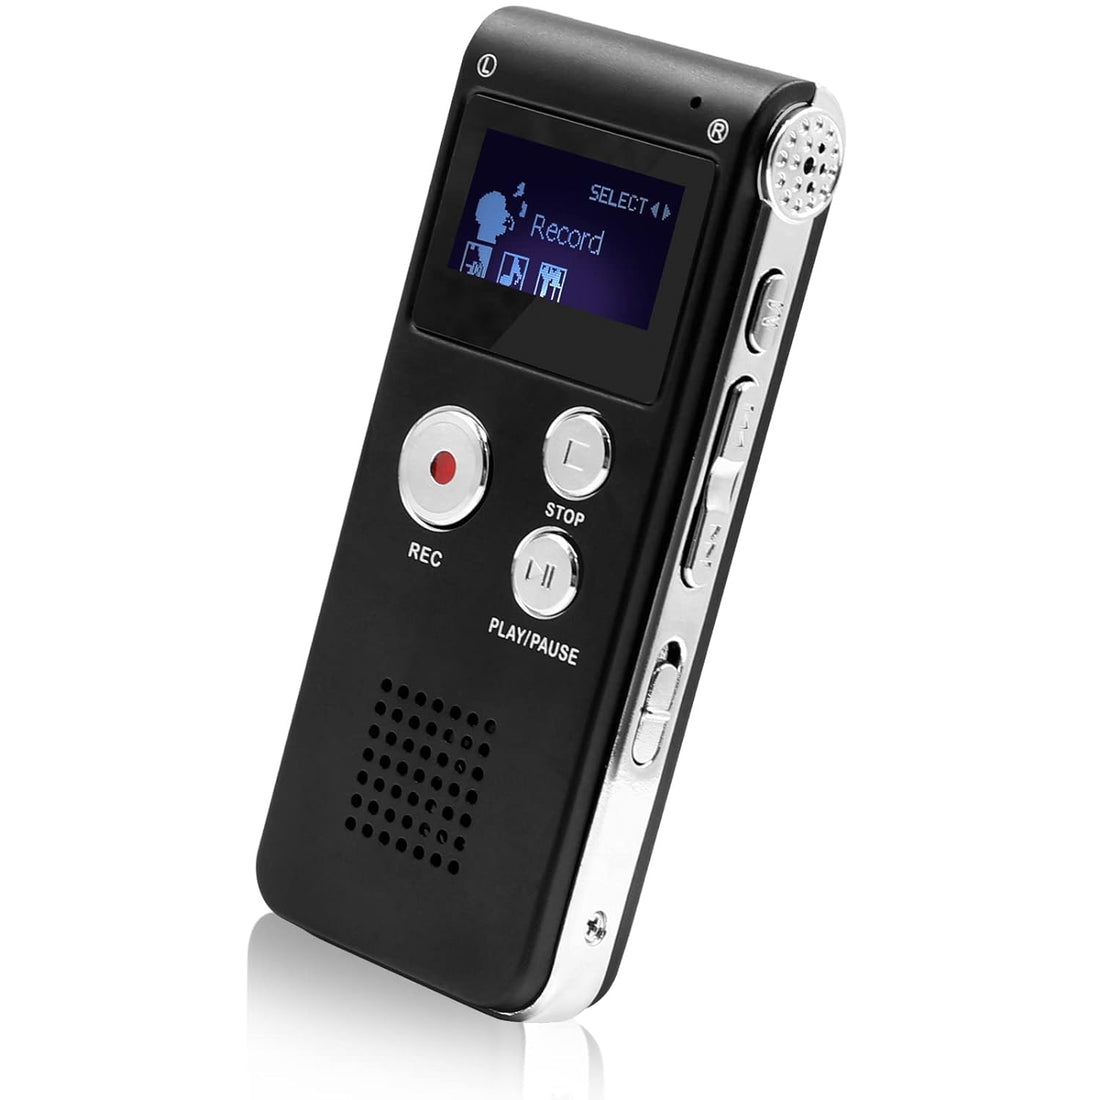 Digital Voice Recorder 8GB 650HR Mini Voice Recorder with Playback EOVAS Voice Activated Digital Audio Recorder for Lectures,Meetings,Interviews Tape Dictaphone with Microphone,MP3,A-B Repeat,USB